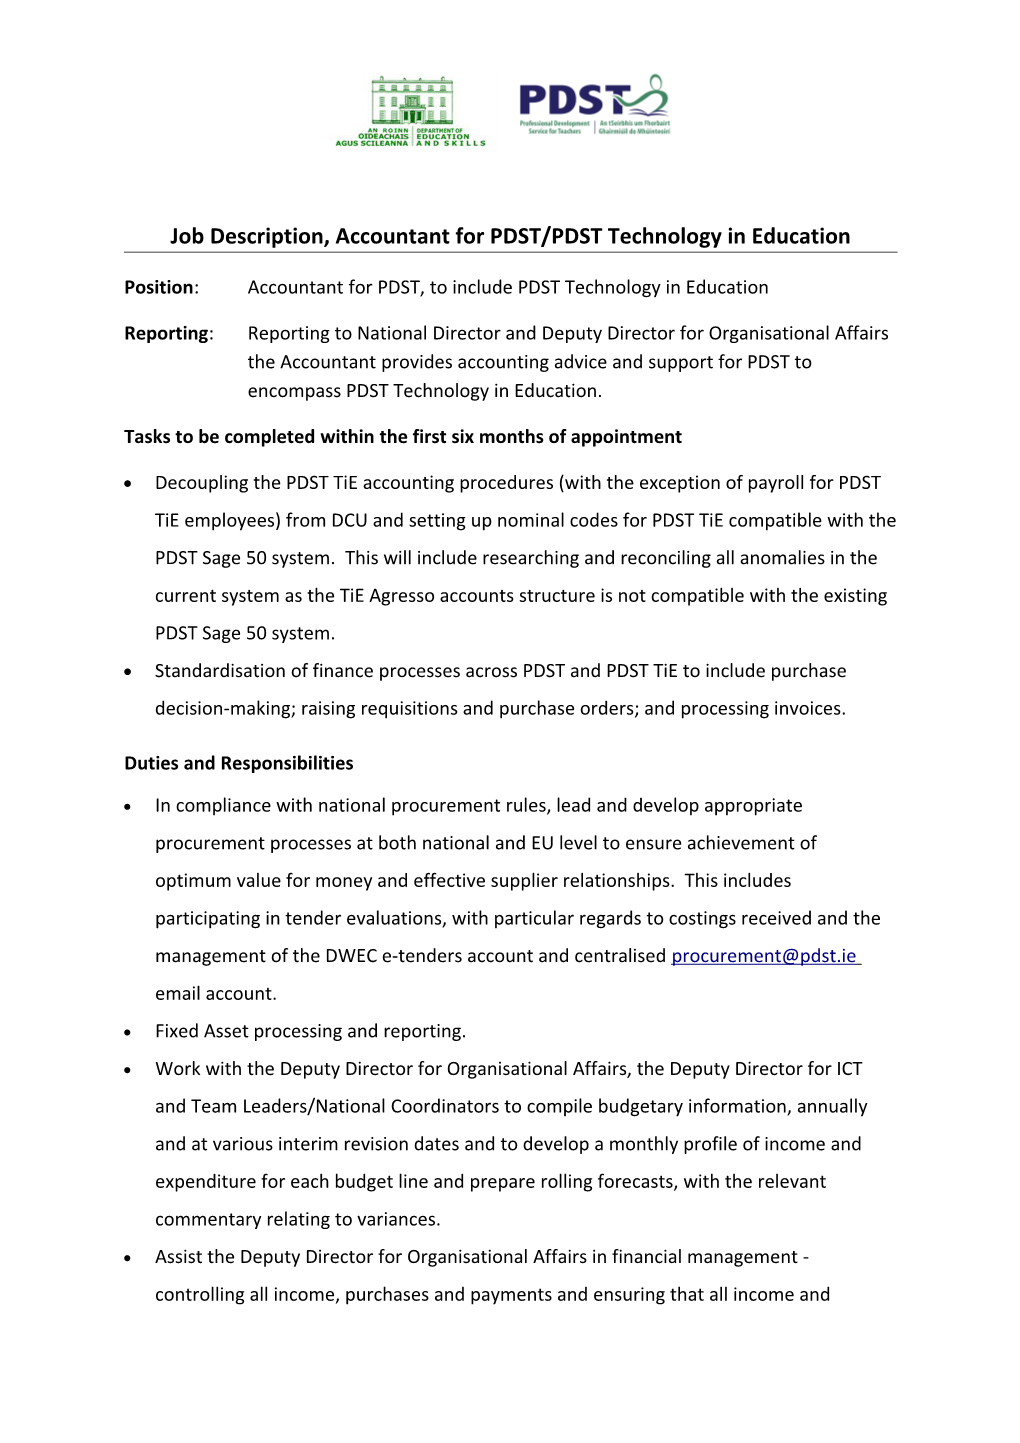 Job Description, Accountant for PDST/PDST Technology in Education